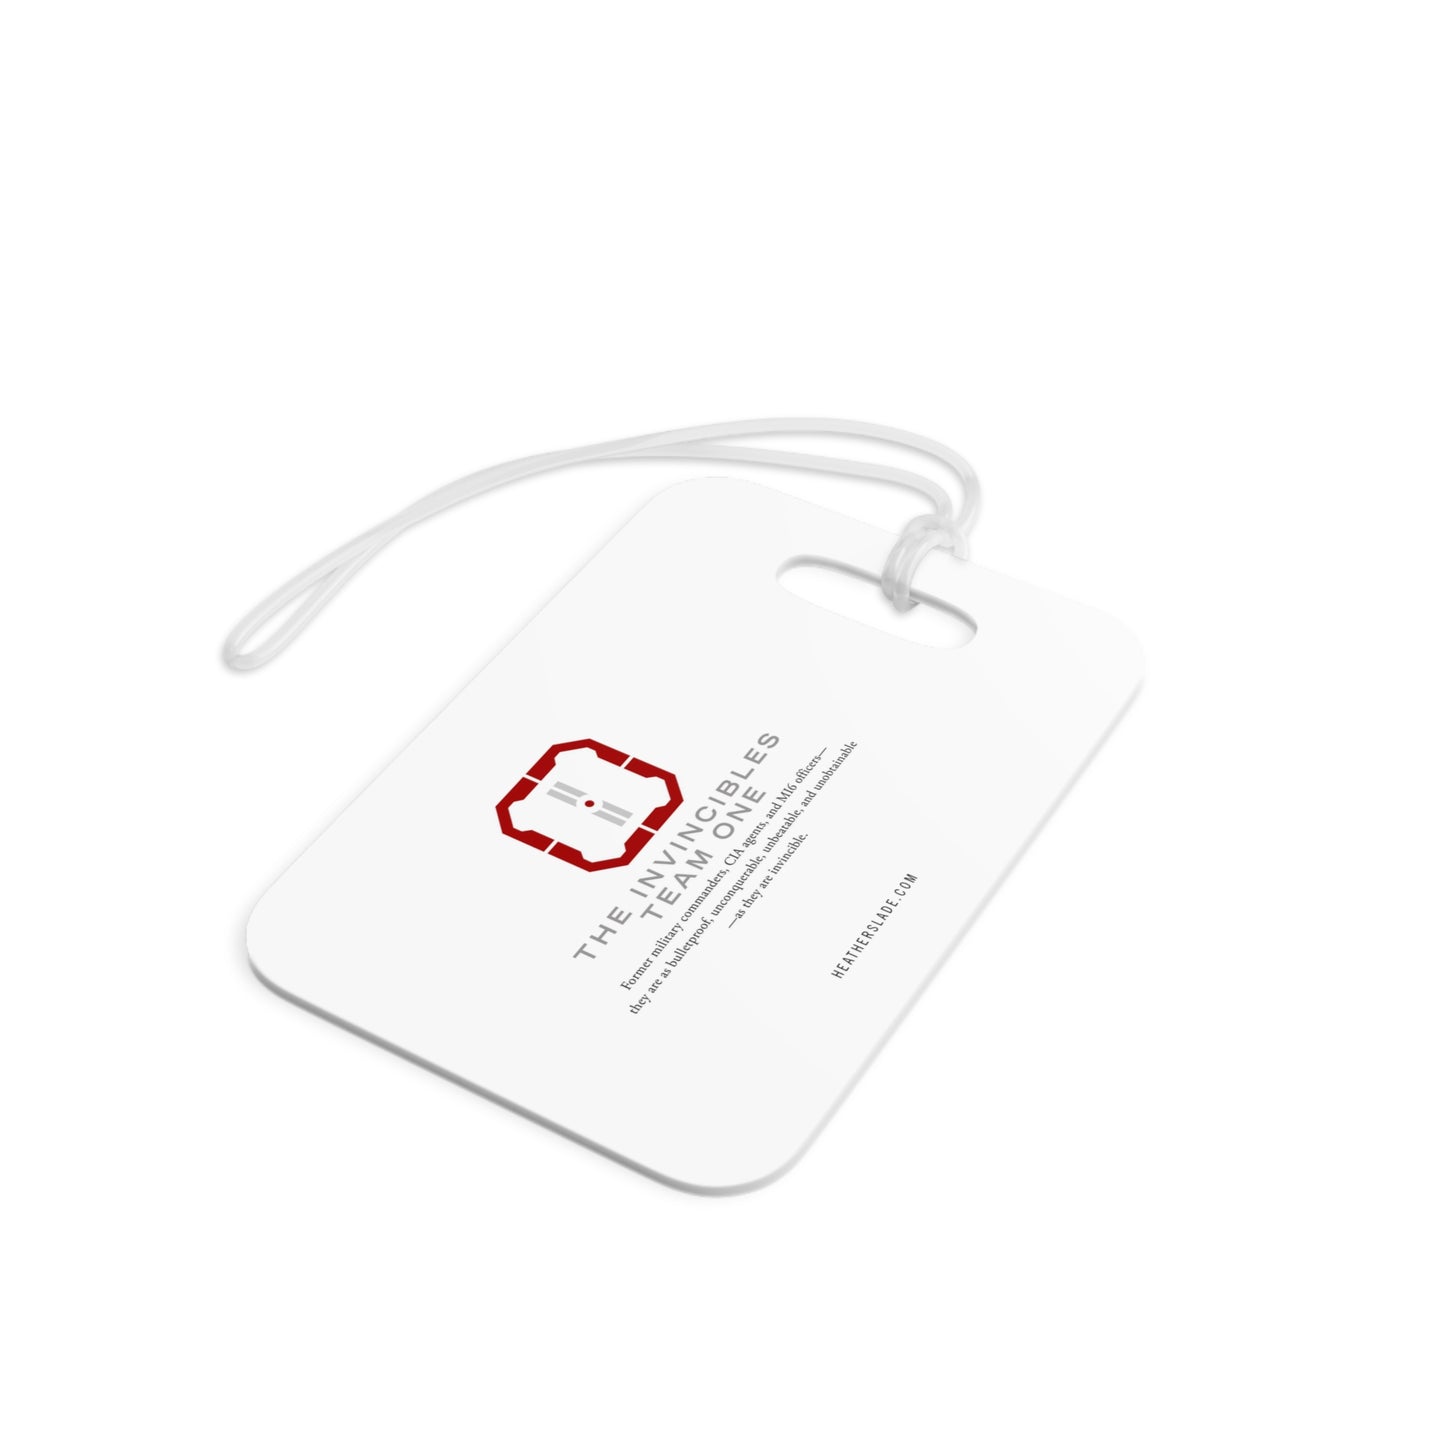 The Invincibles Team One Luggage Tags